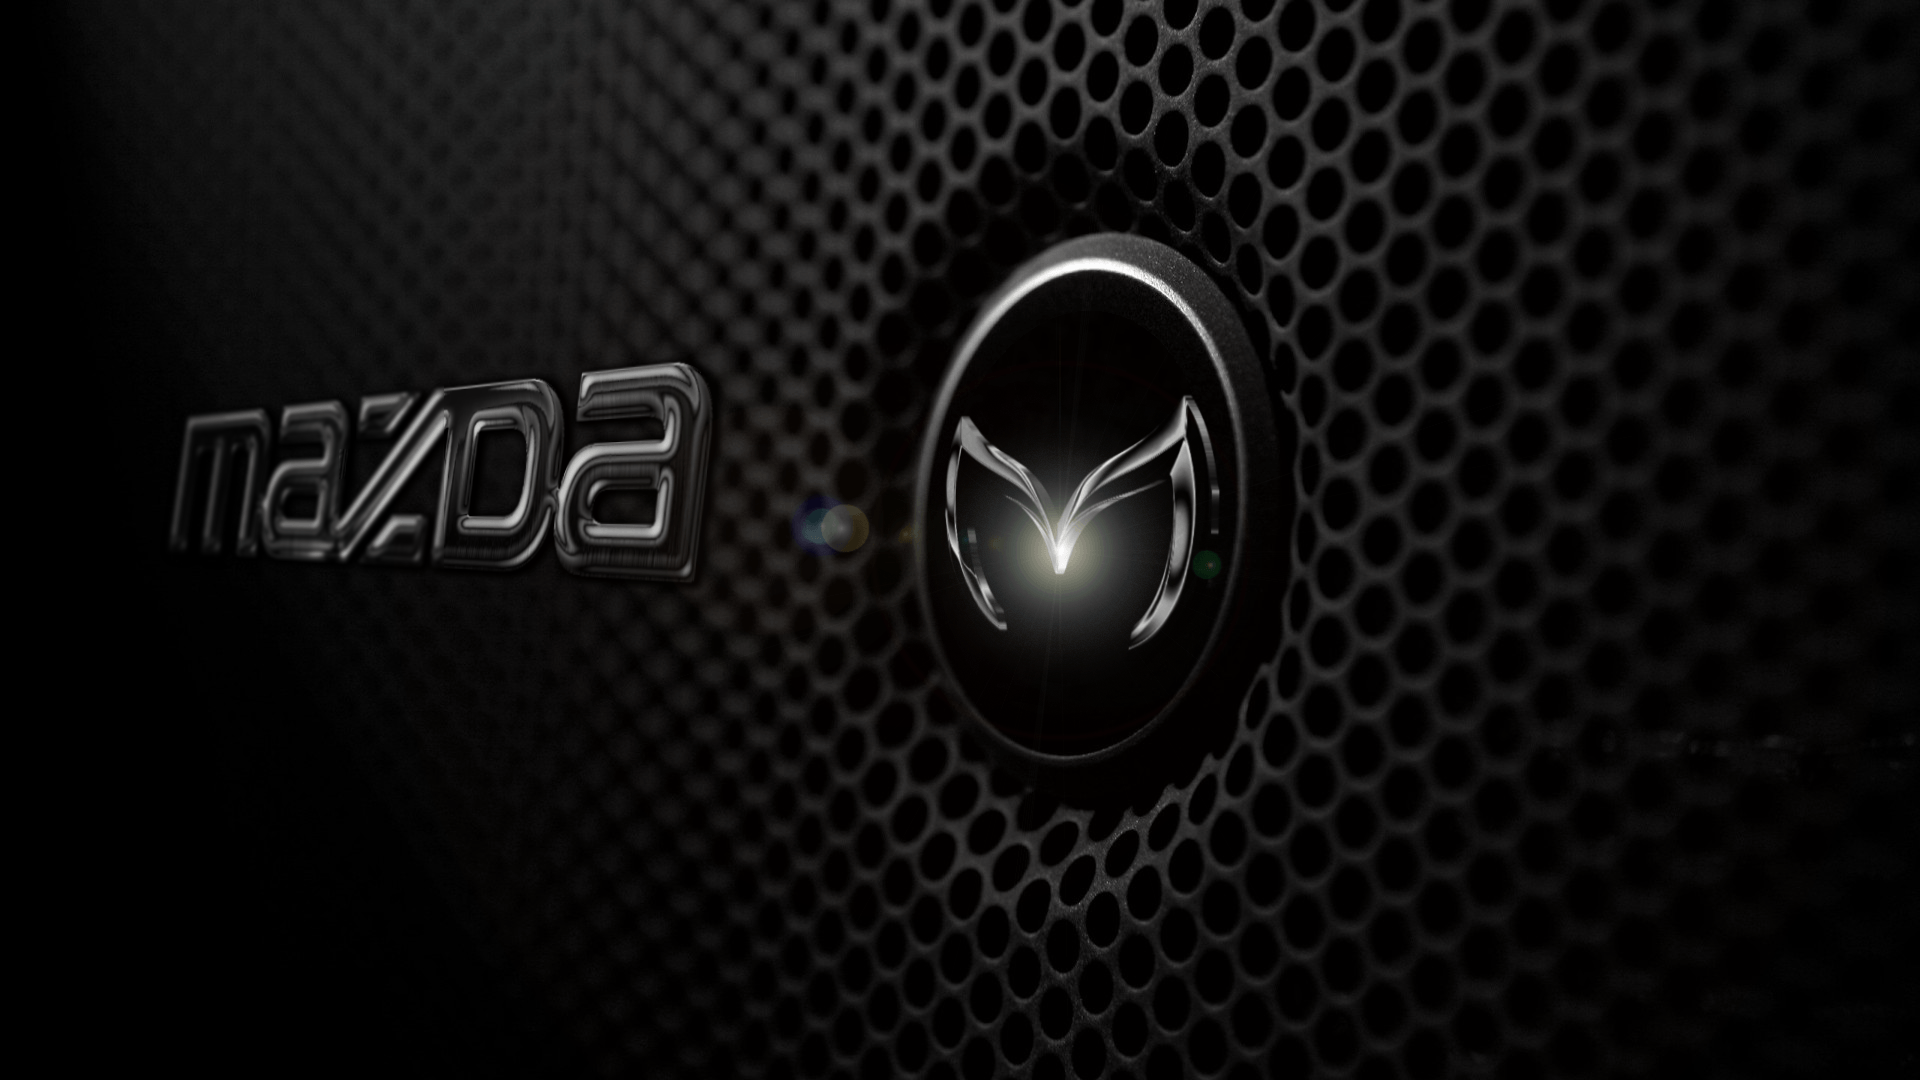 Mazda Wallpaper HD Photo, Wallpaper and other Image